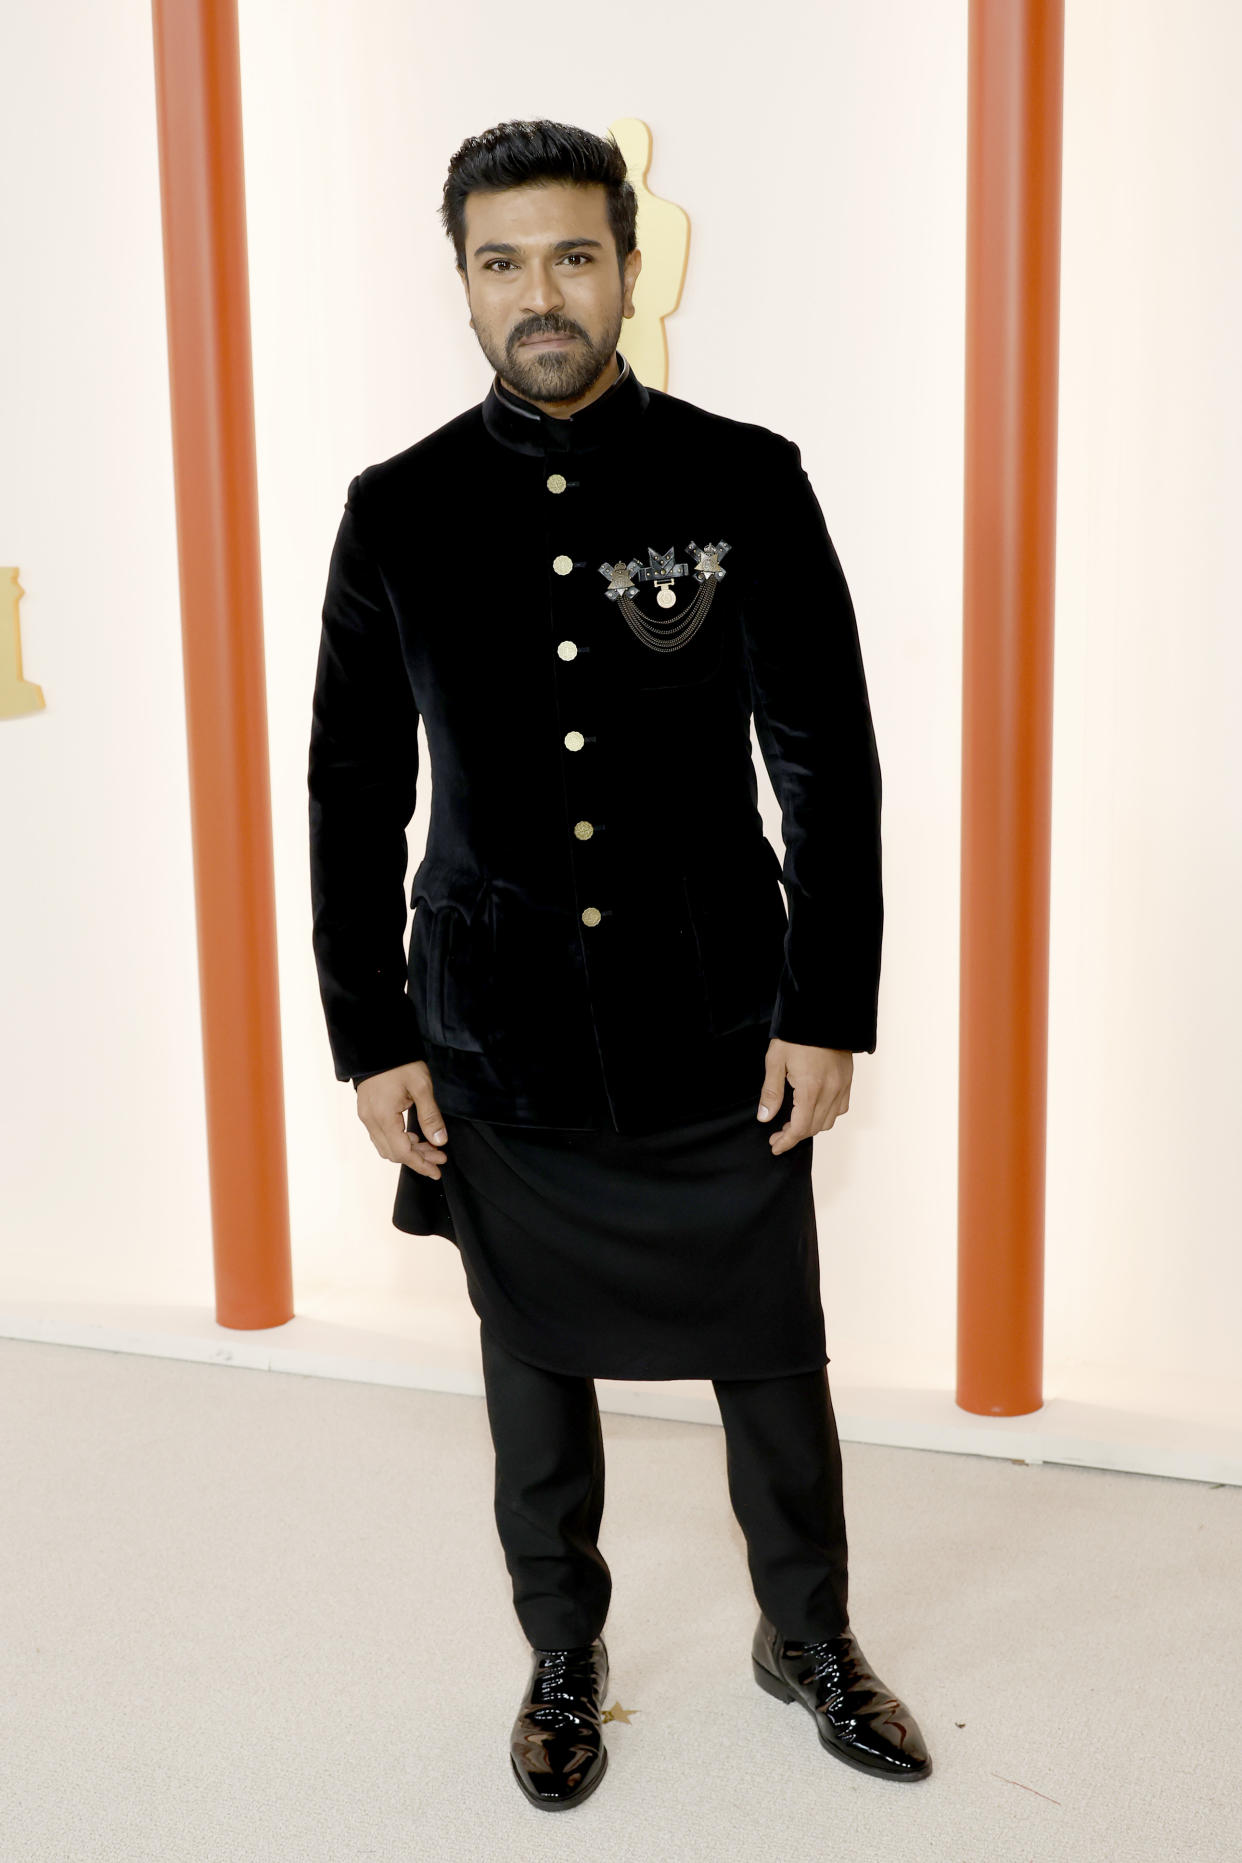 HOLLYWOOD, CALIFORNIA - MARCH 12: Ram Charan attends the 95th Annual Academy Awards on March 12, 2023 in Hollywood, California. (Photo by Mike Coppola/Getty Images)